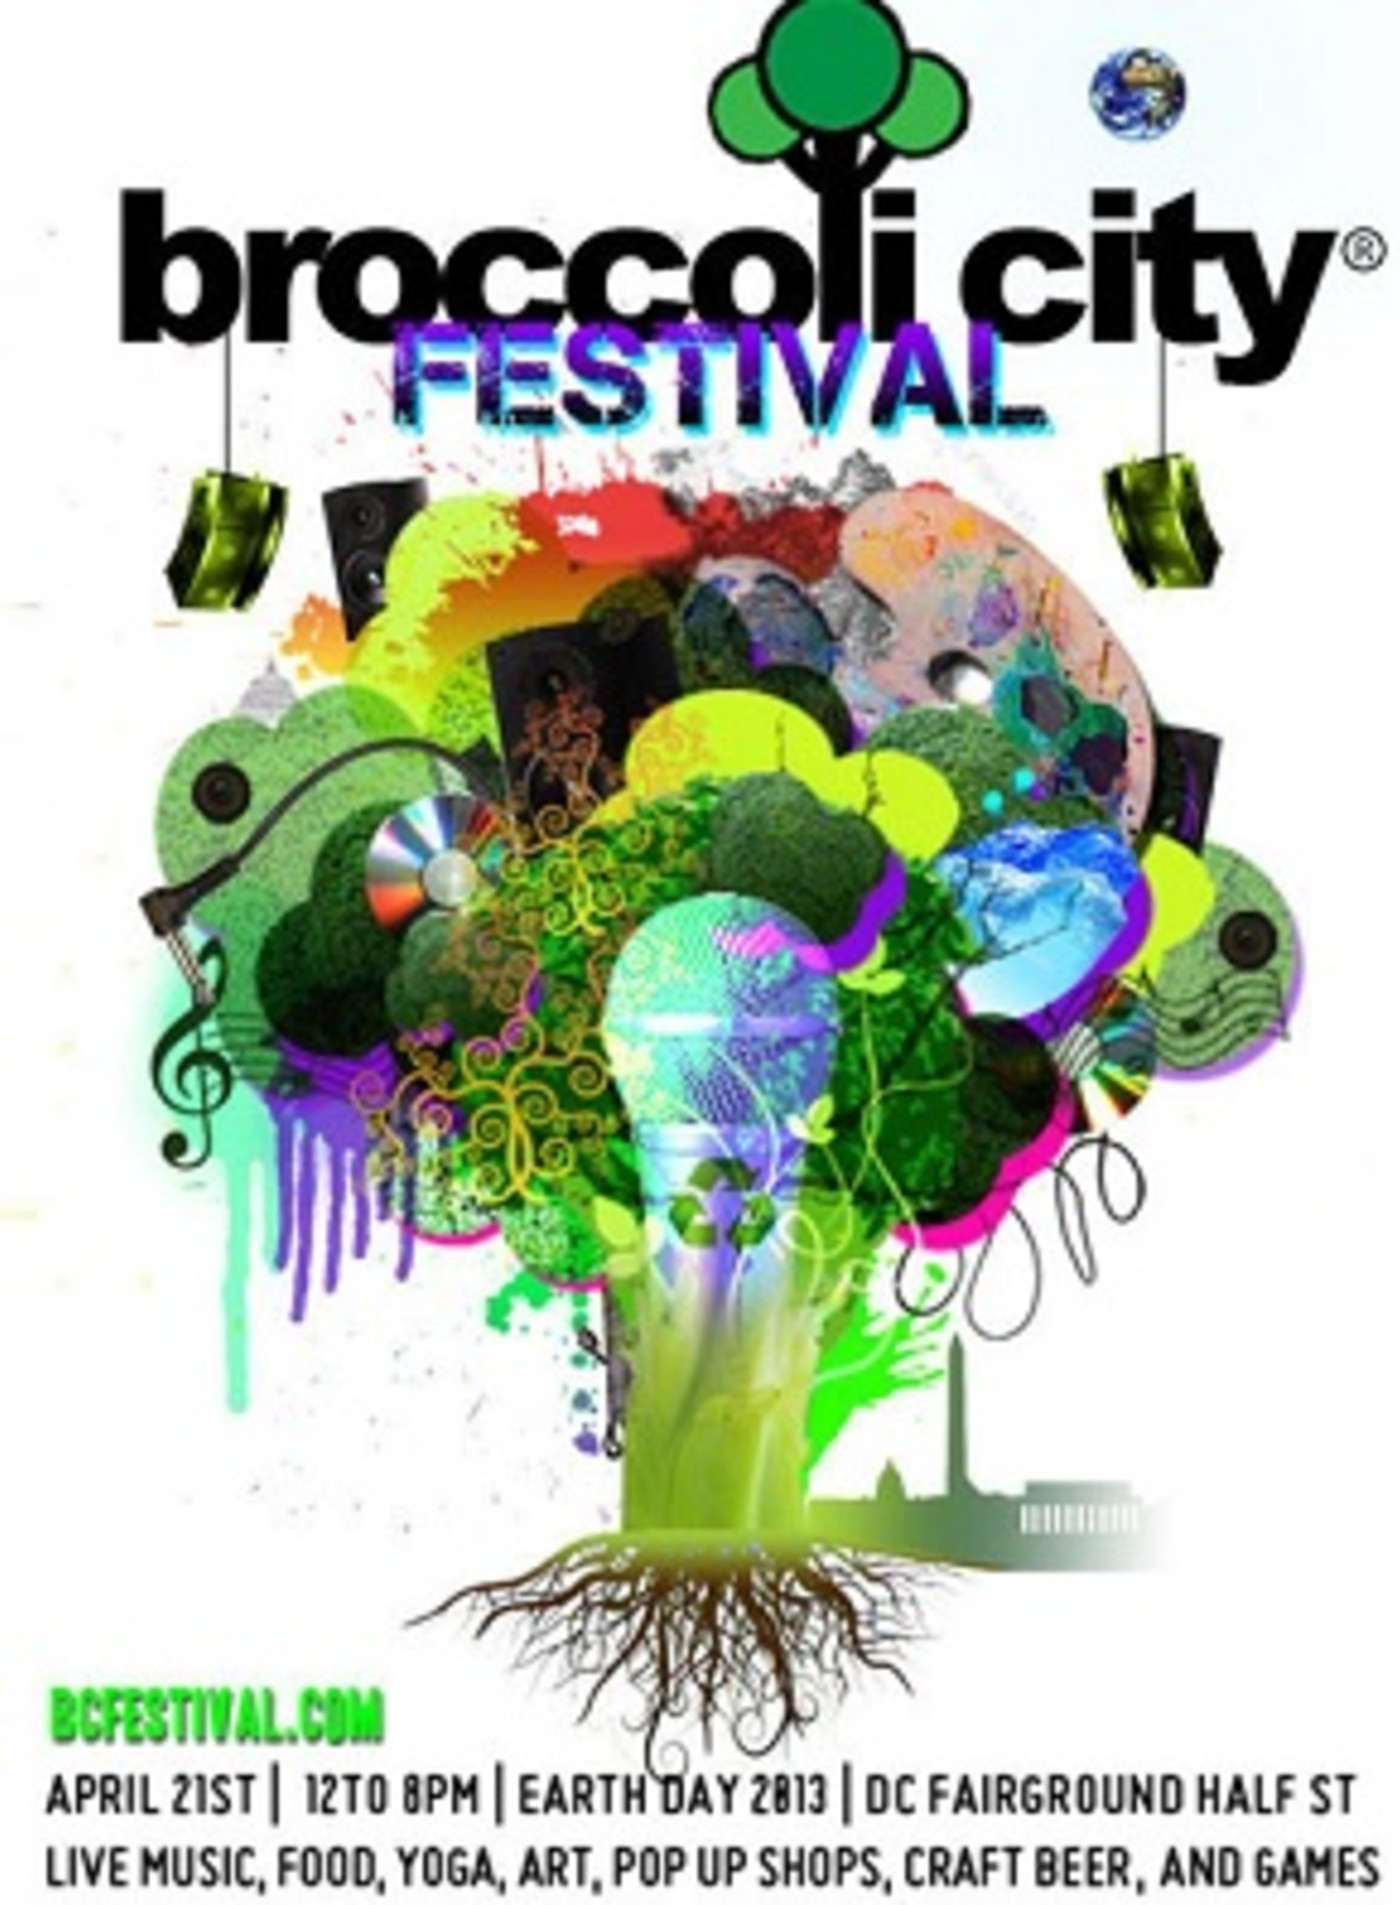 Broccoli City Festival Will Make D.C. "Green" with Earth Day